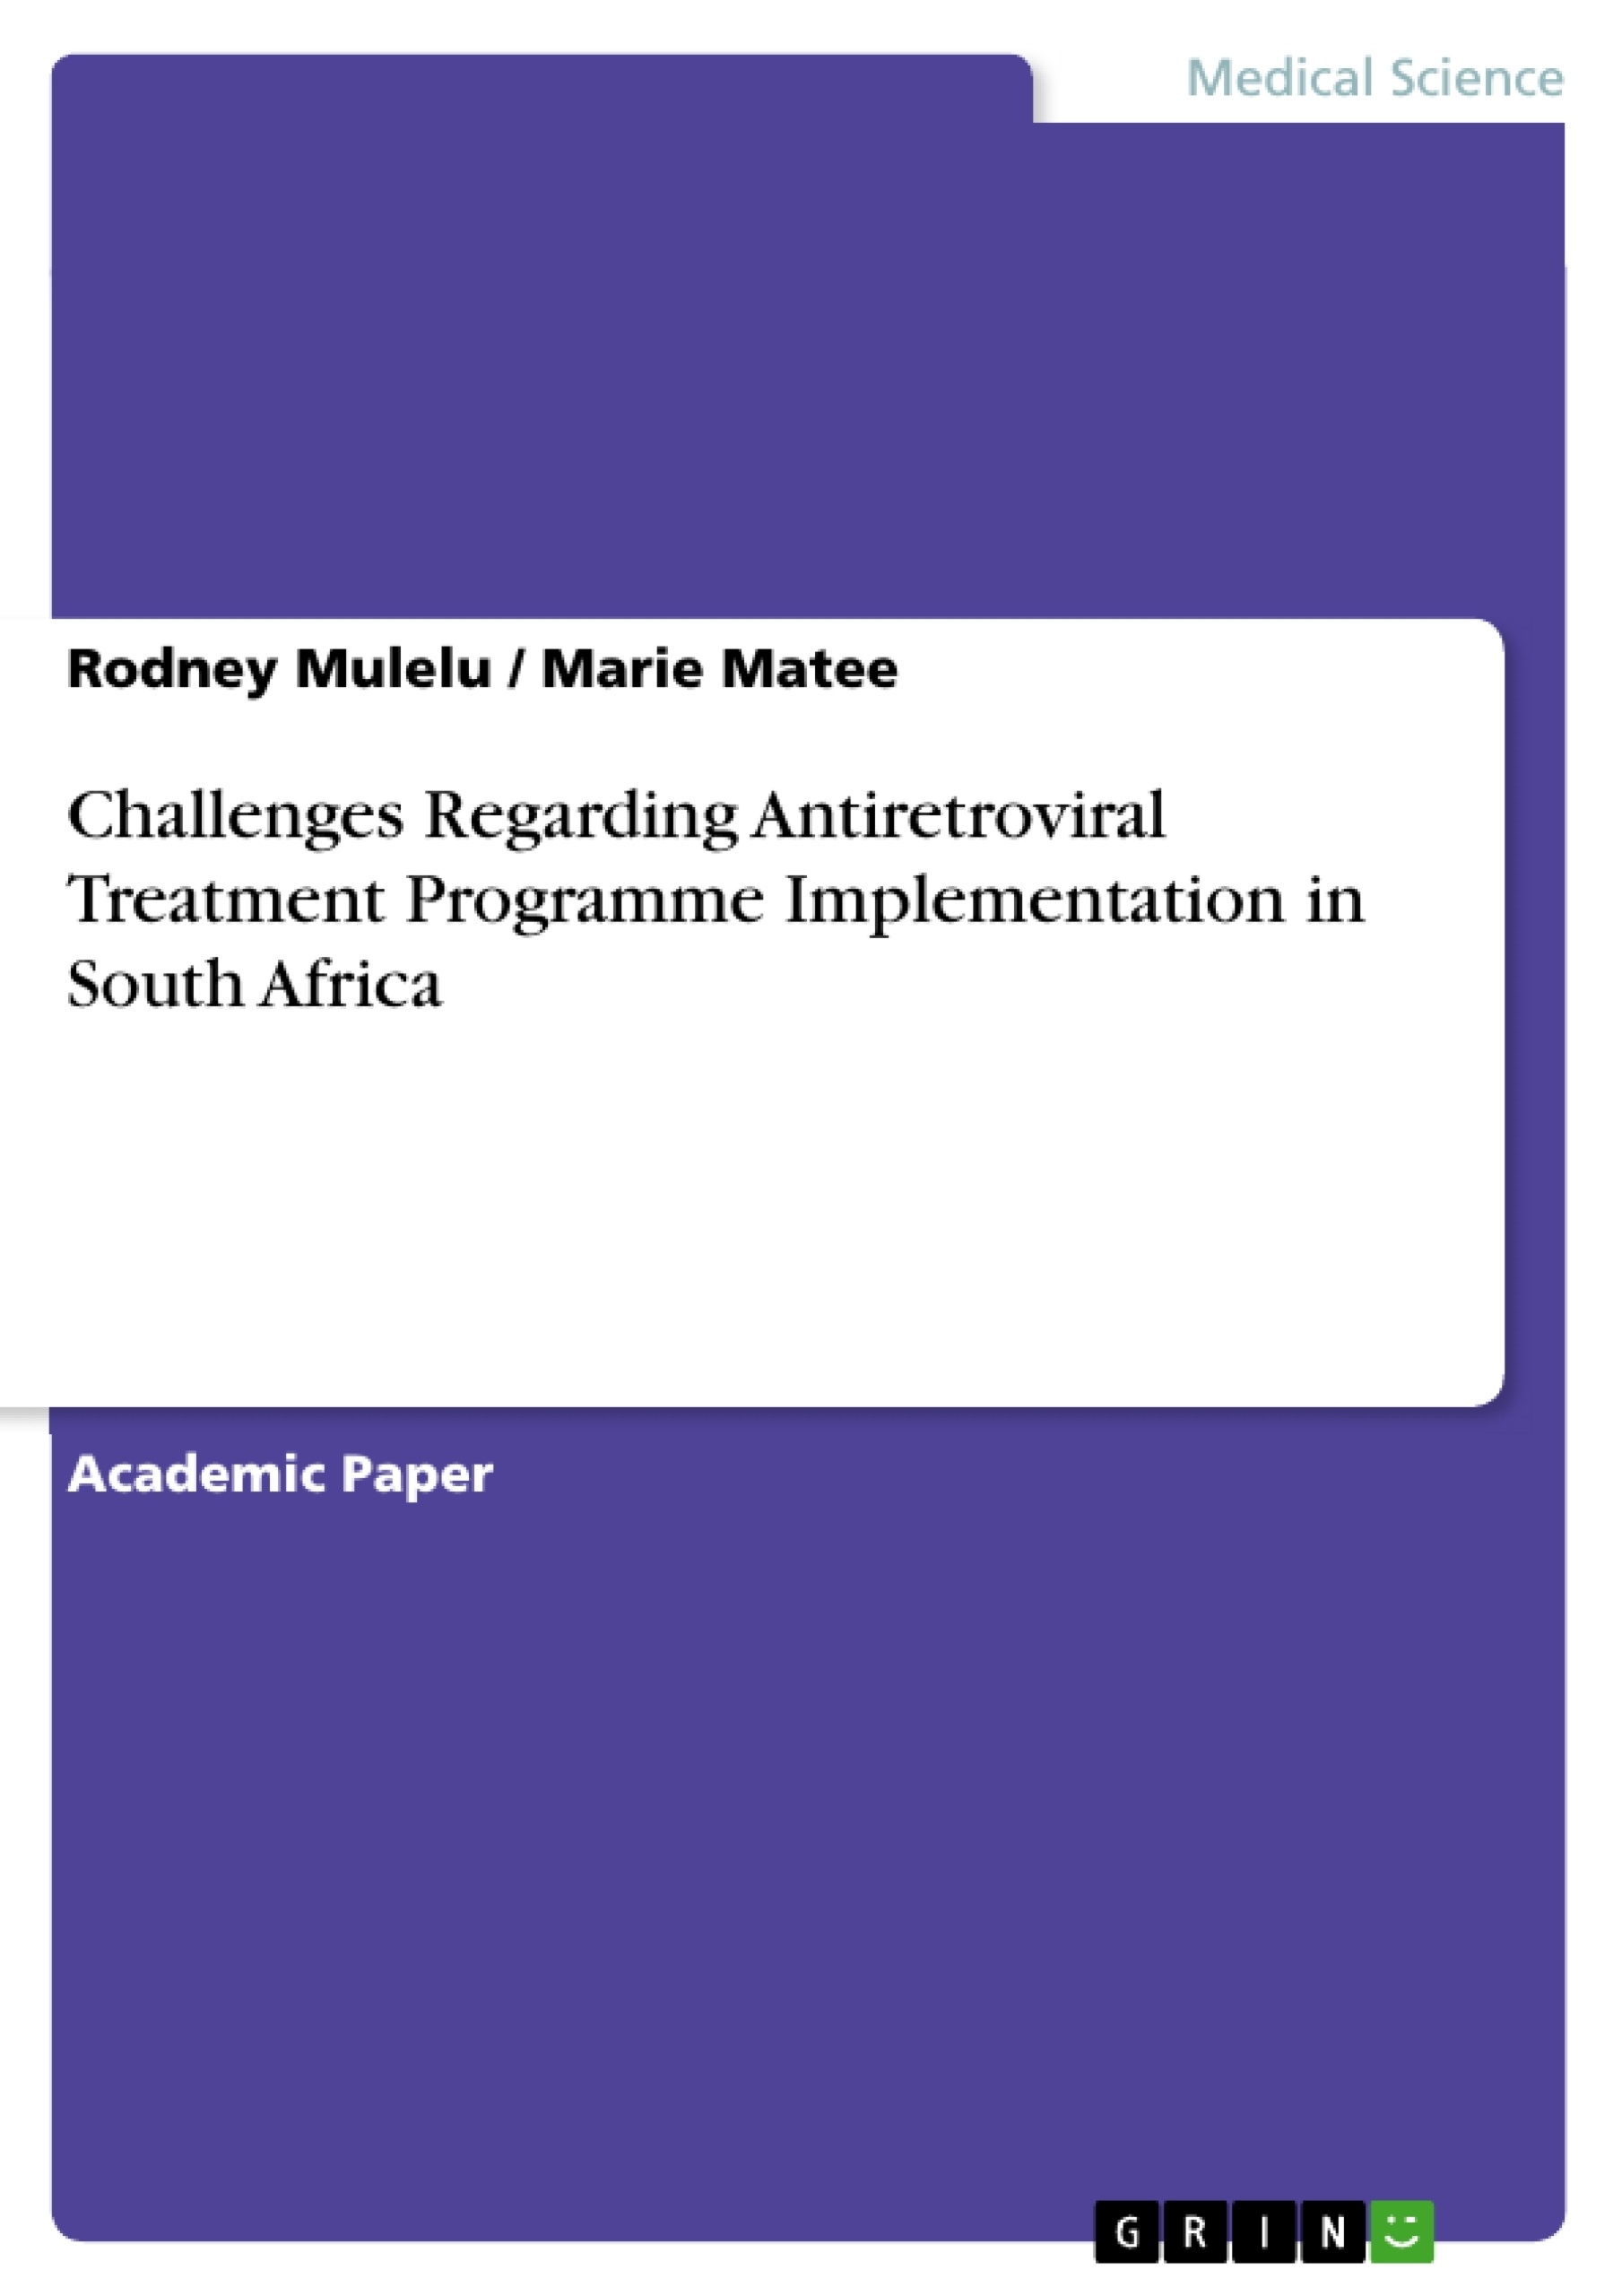 Título: Challenges Regarding Antiretroviral Treatment Programme Implementation in South Africa